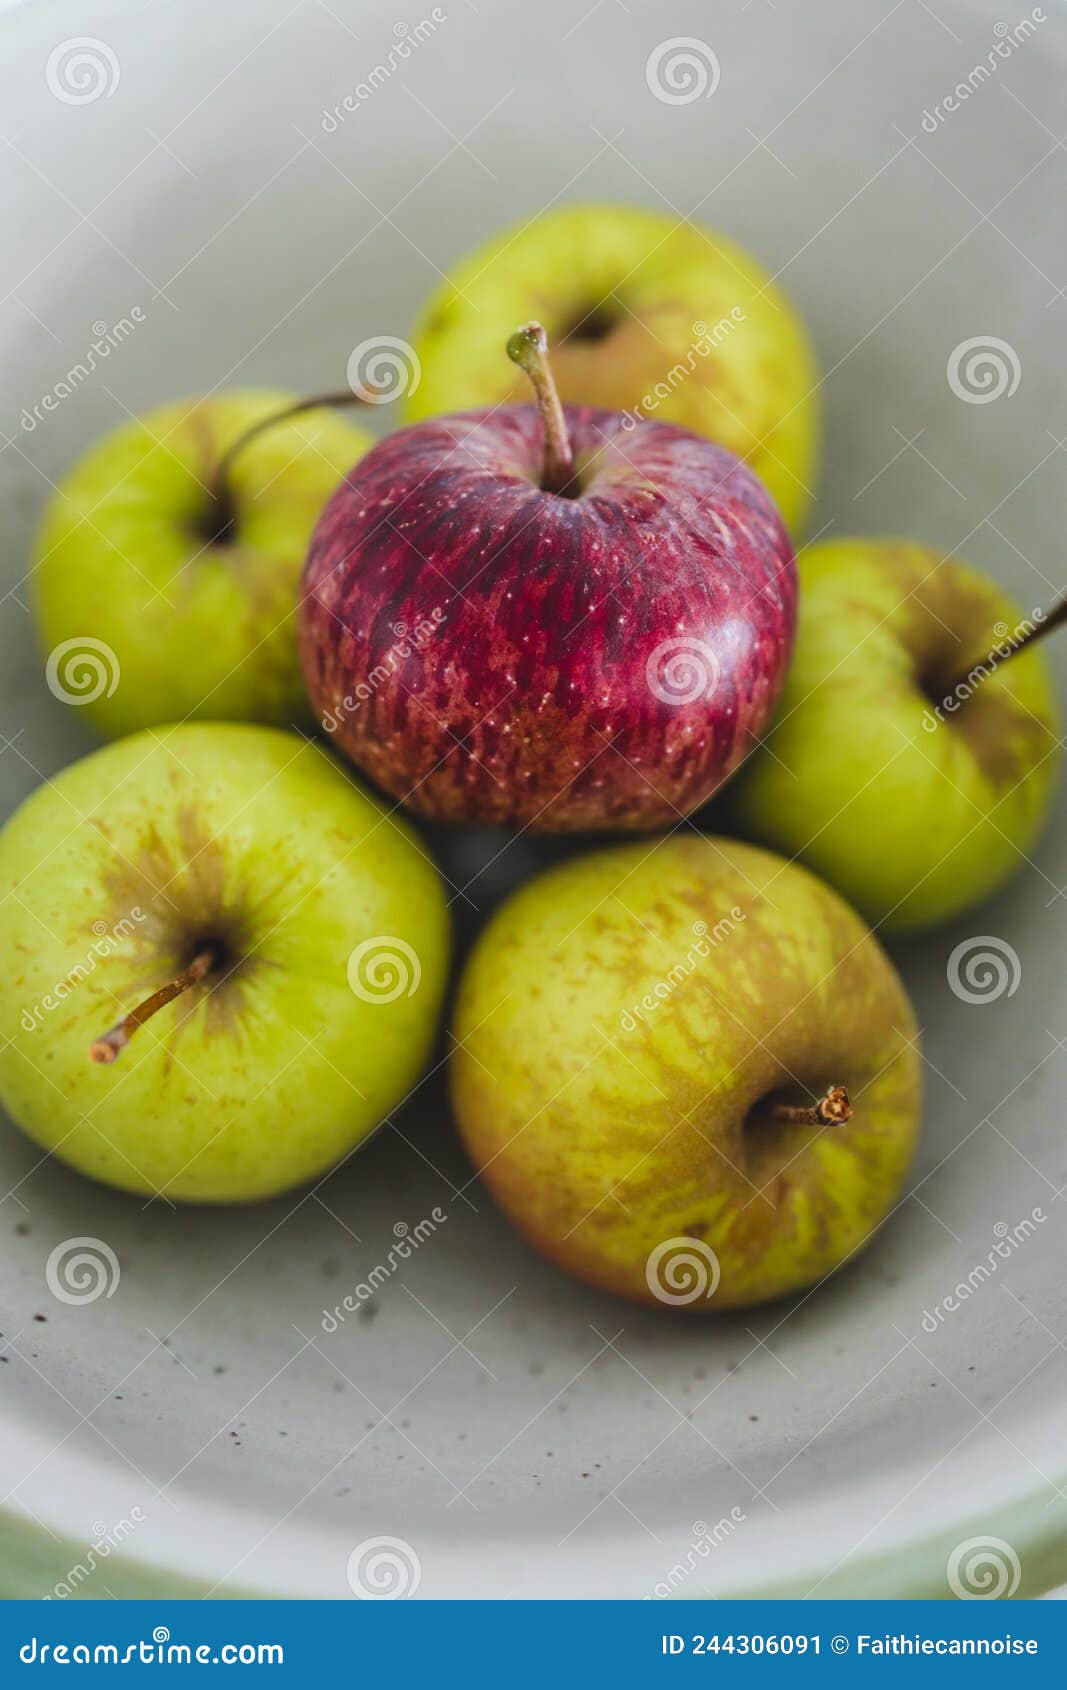 https://thumbs.dreamstime.com/z/group-green-apples-one-red-apple-middle-healthy-food-metaphor-standing-out-crowd-concept-244306091.jpg